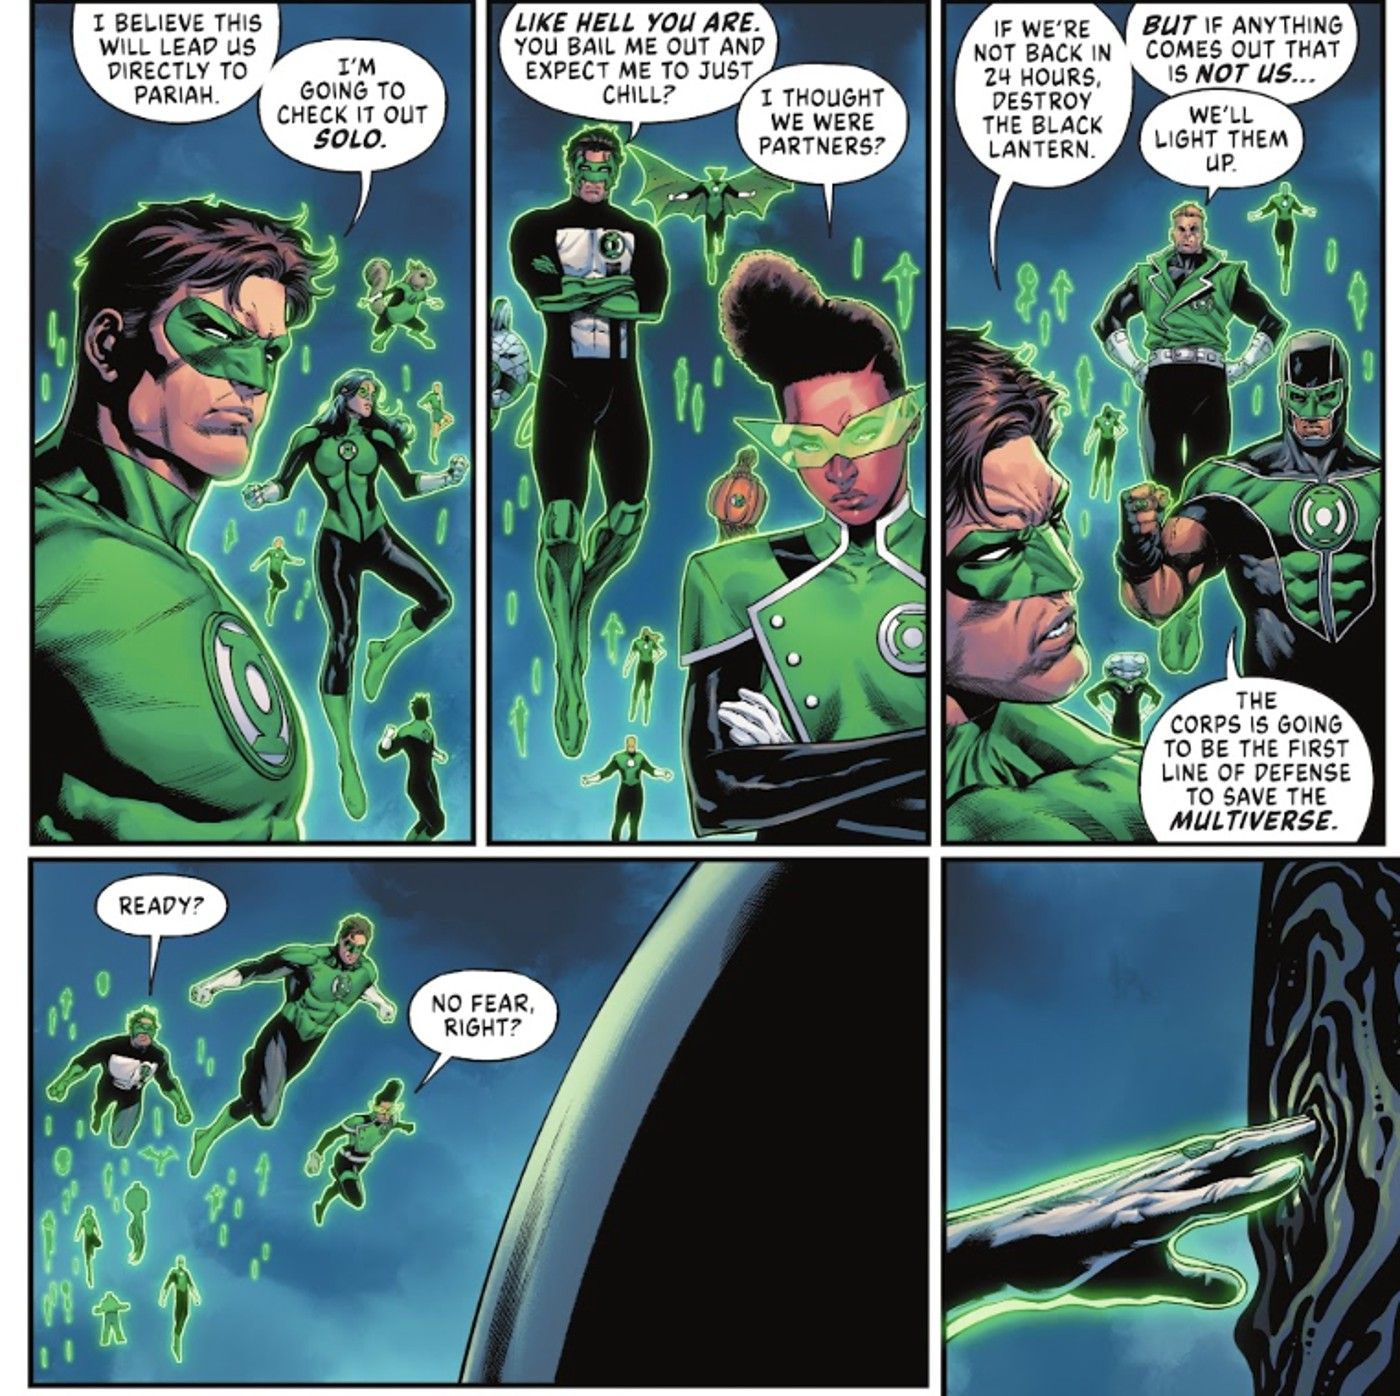 Green Lanterns Unite Across Time, Proving They’re DC’s Greatest Legacy